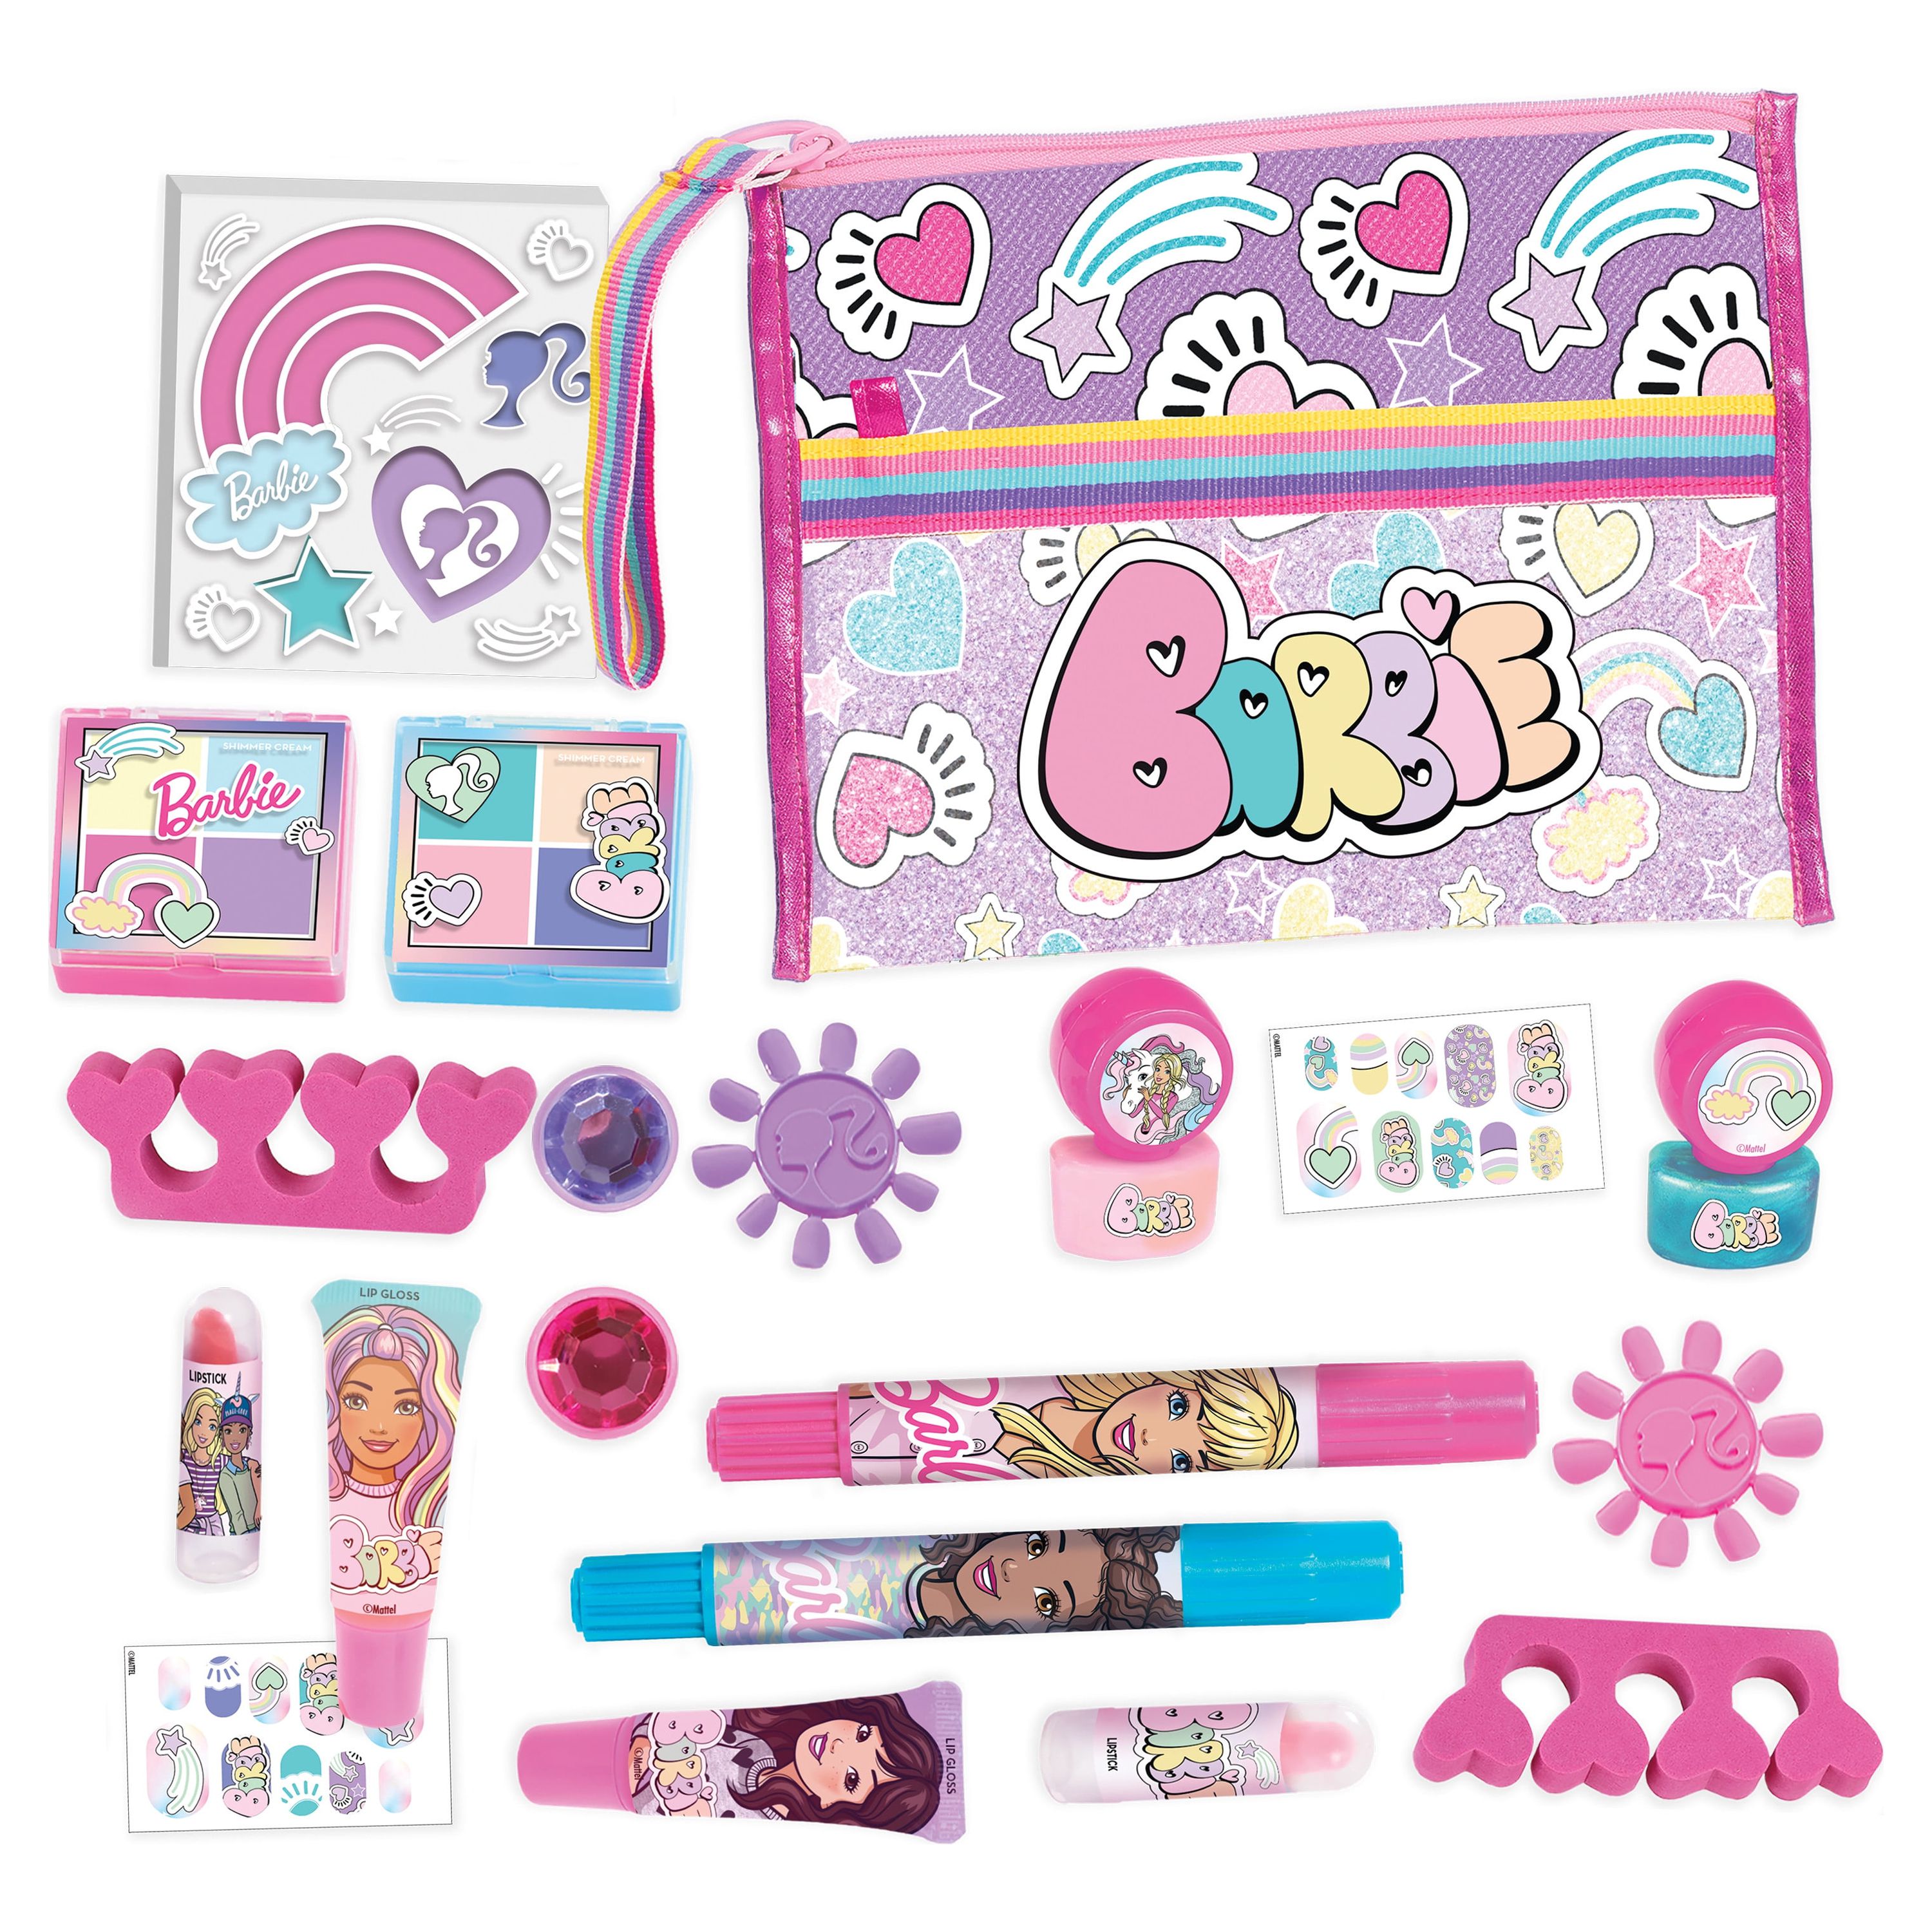 Barbie Deluxe Makeup Set, 20-Piece Play Make Up Set for Kids, Includes Nail Polish and Hair Chalk,  Kids Toys for Ages 5 Up, Gifts and Presents - image 1 of 6